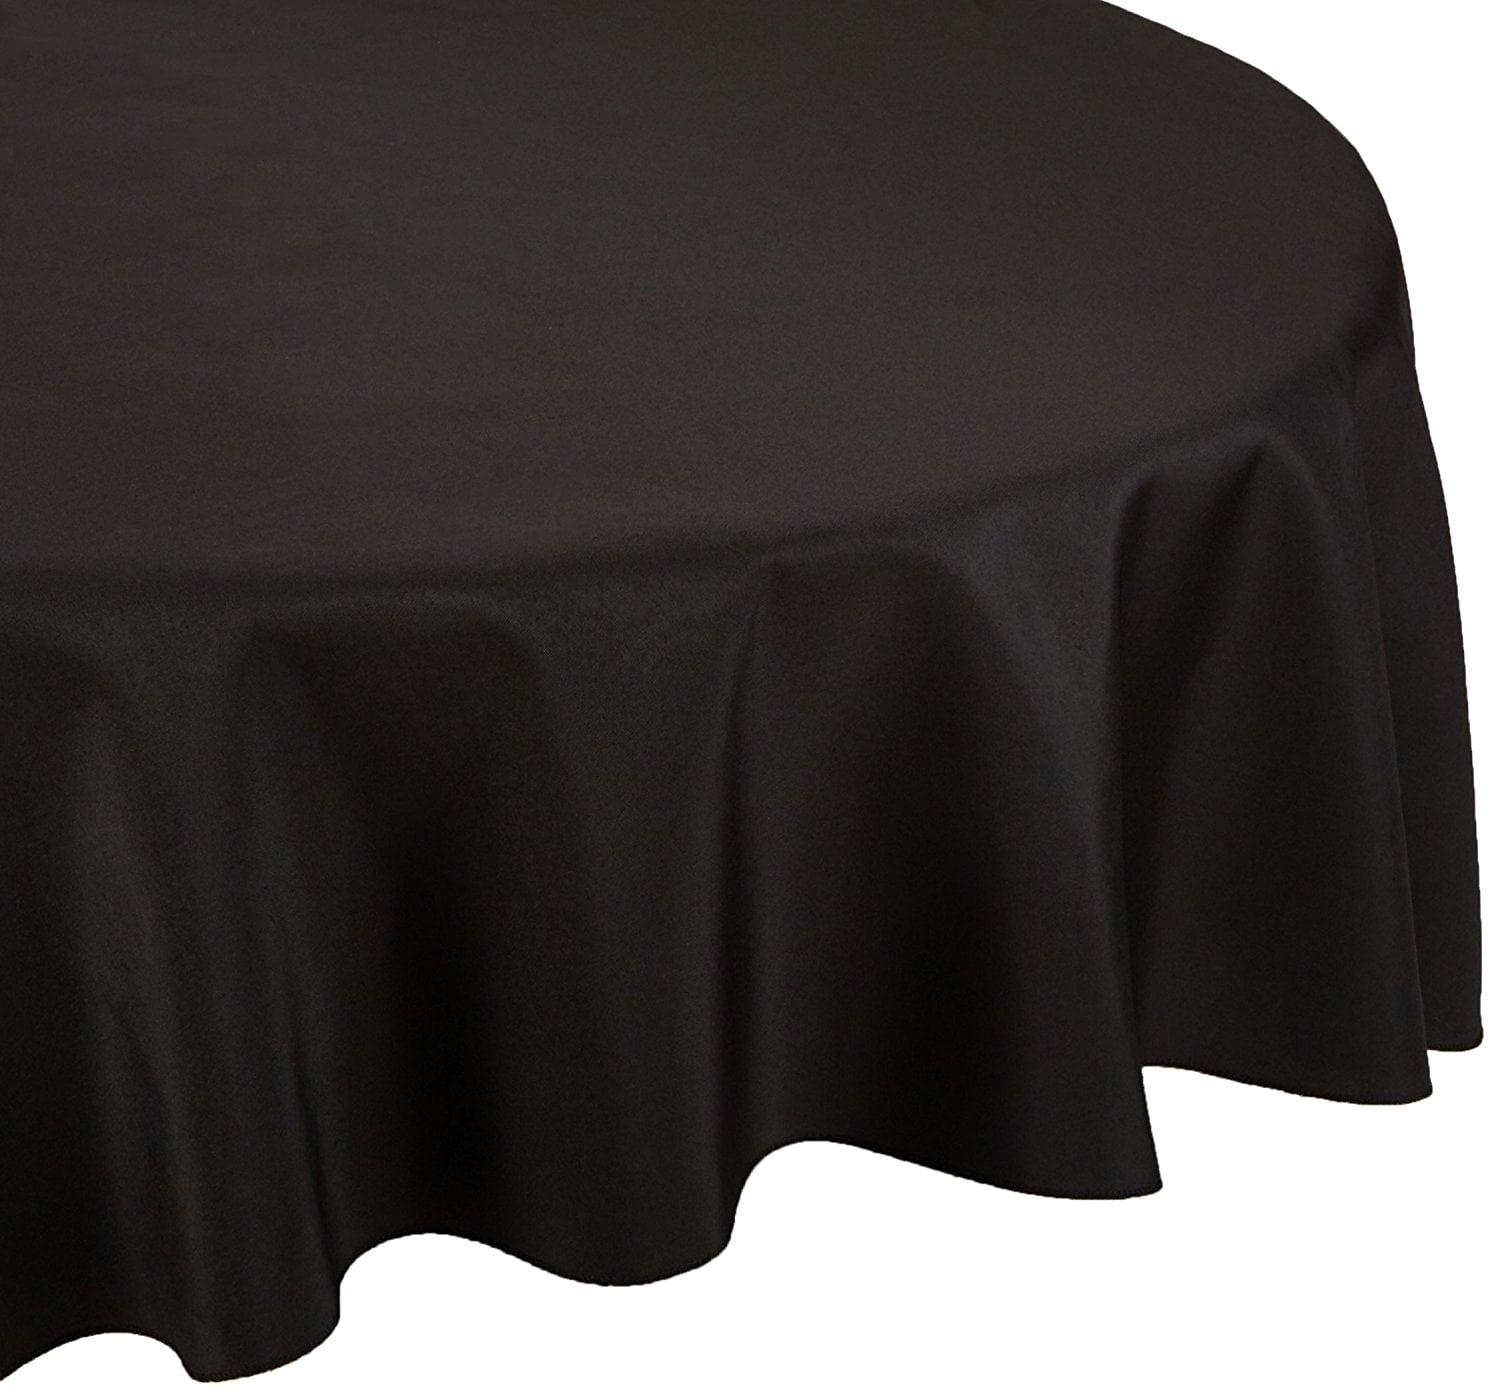 120 Inch Round Polyester Tablecloth, 120 Inch Round Cotton Tablecloth